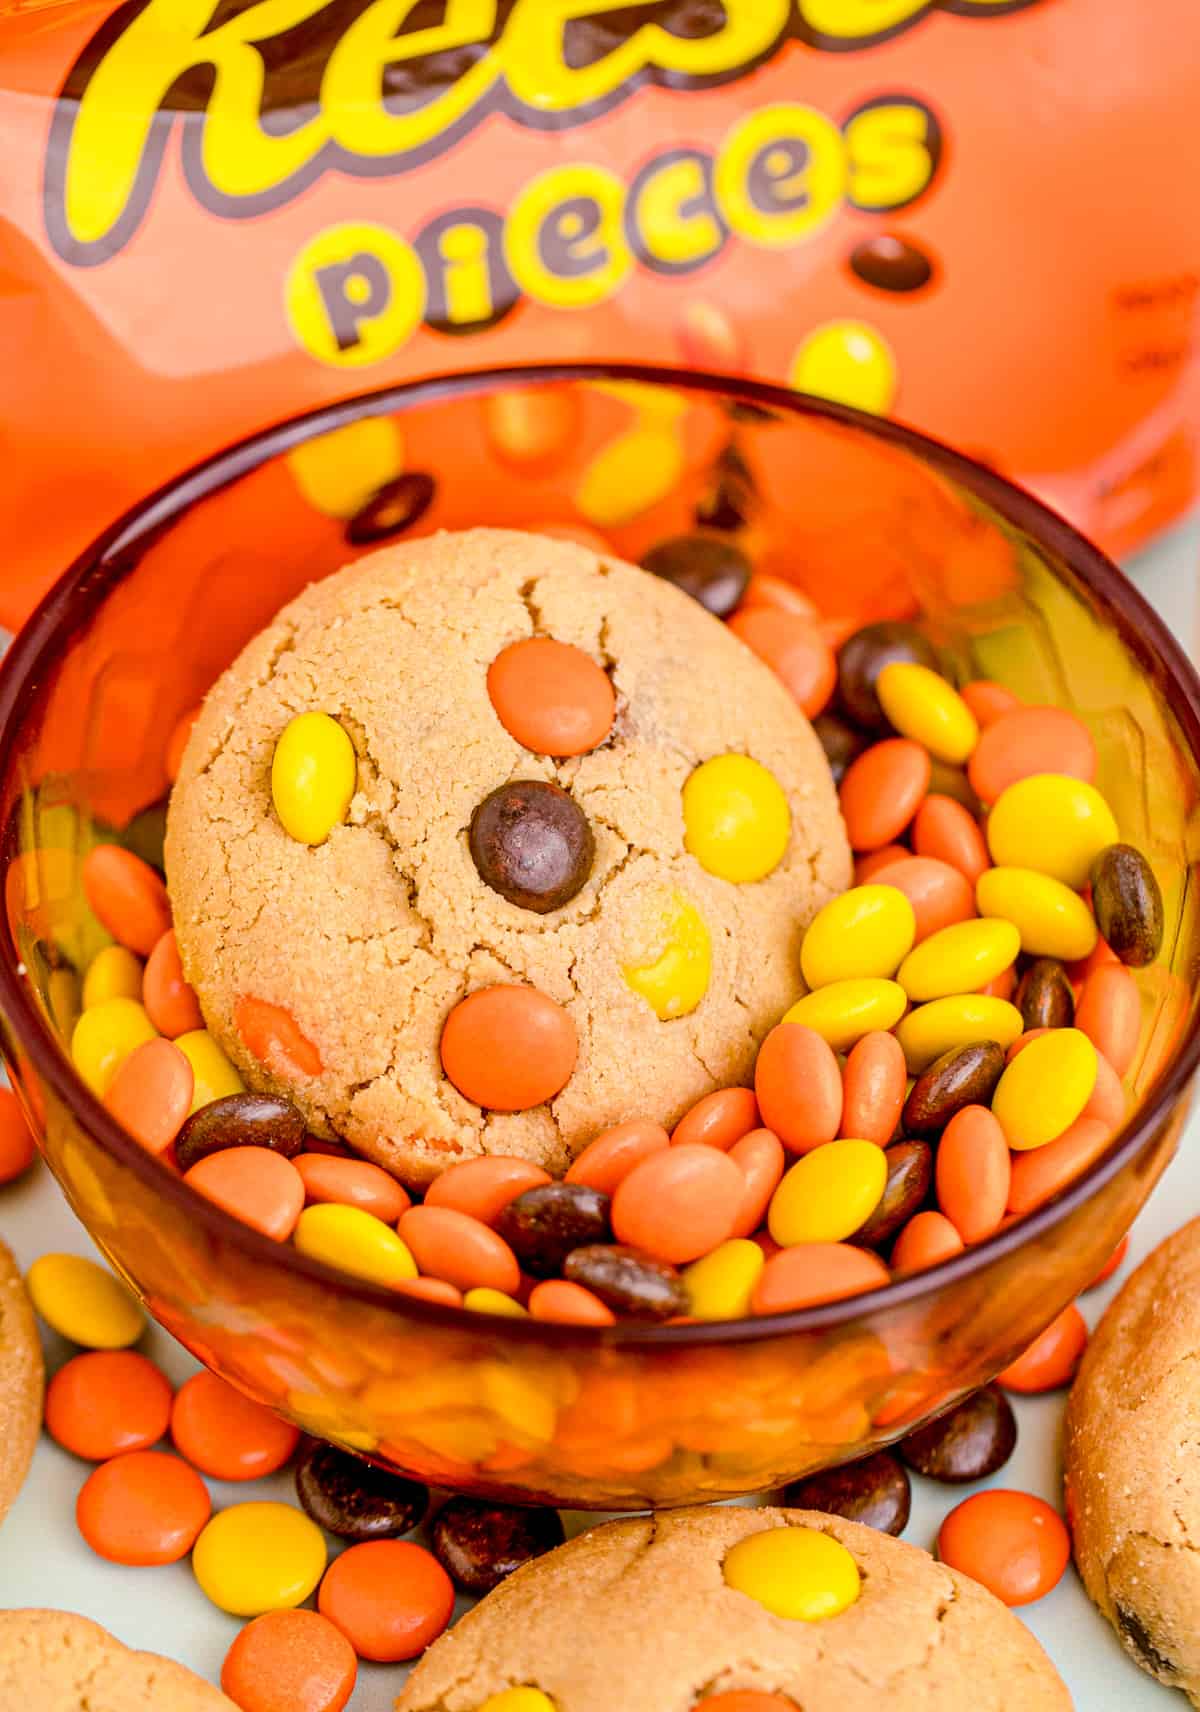 One cookie in a bowl of Reese's Pieces.